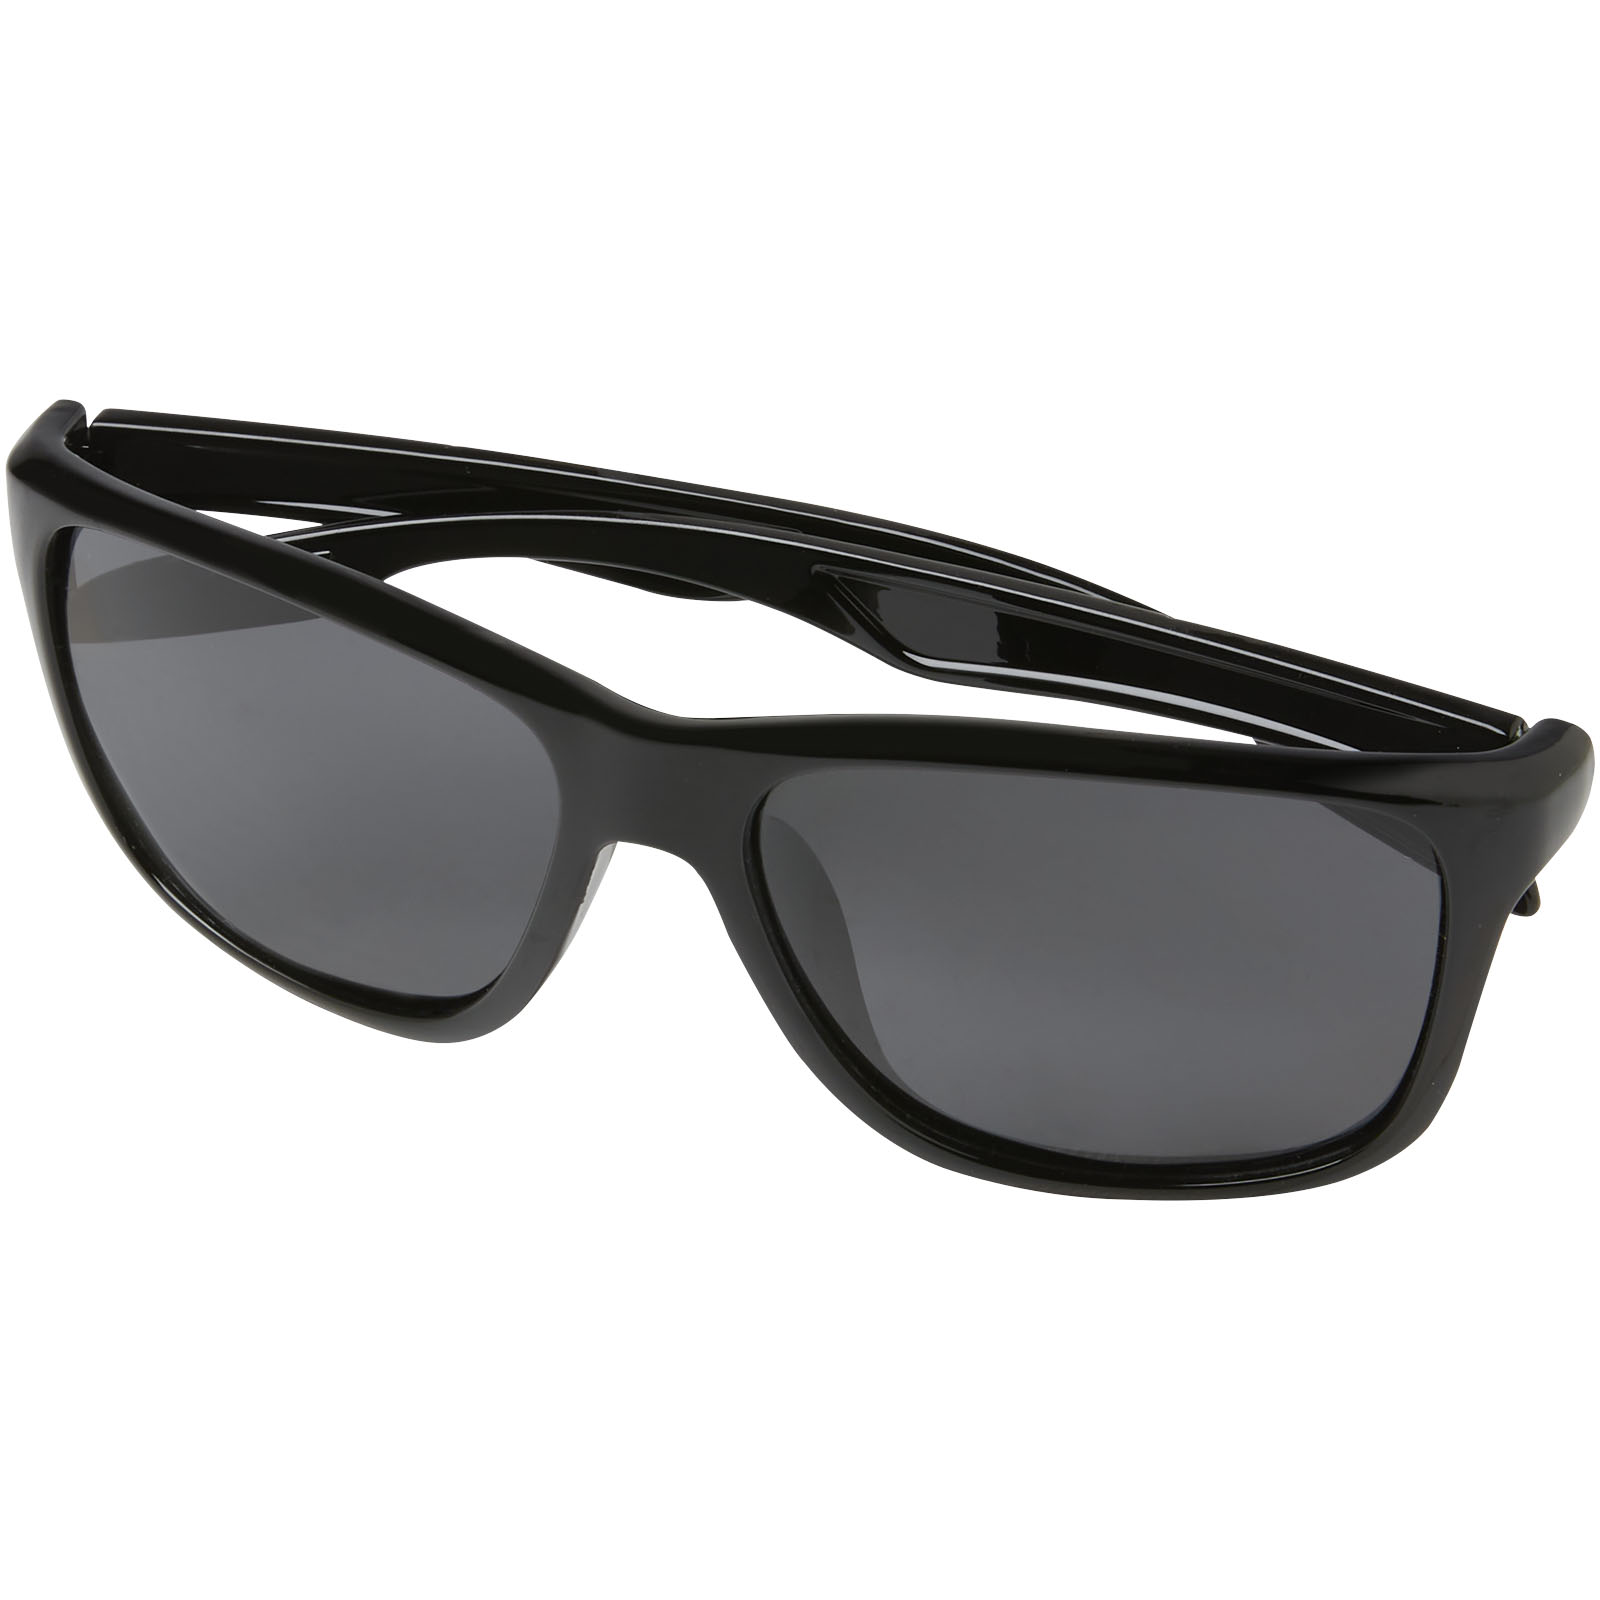 Advertising Sunglasses - Eiger polarized sunglasses in recycled PET casing - 3